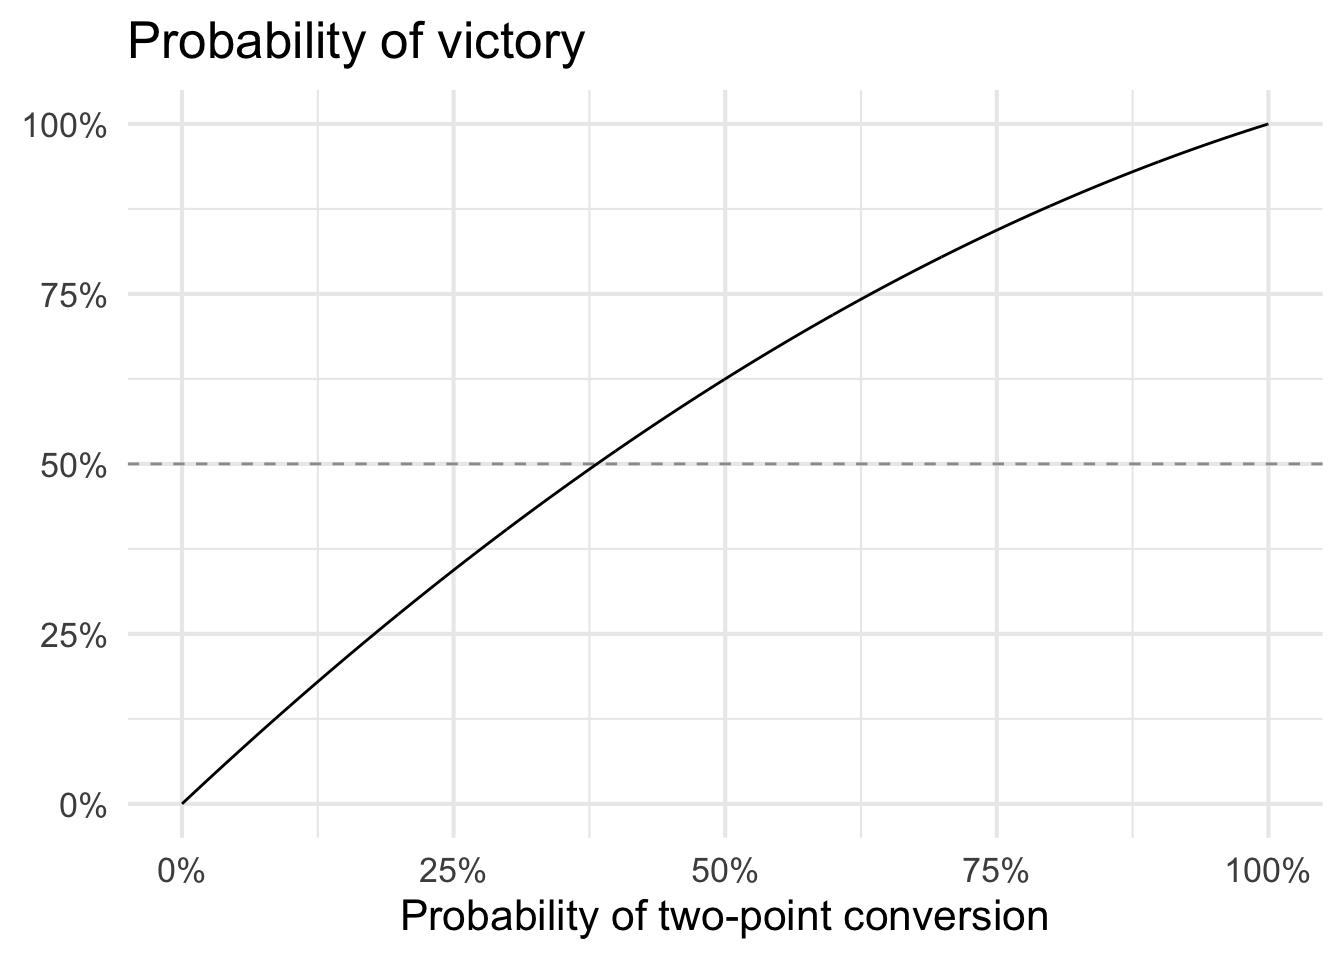 Probability of victory based on different two-point conversion success rates